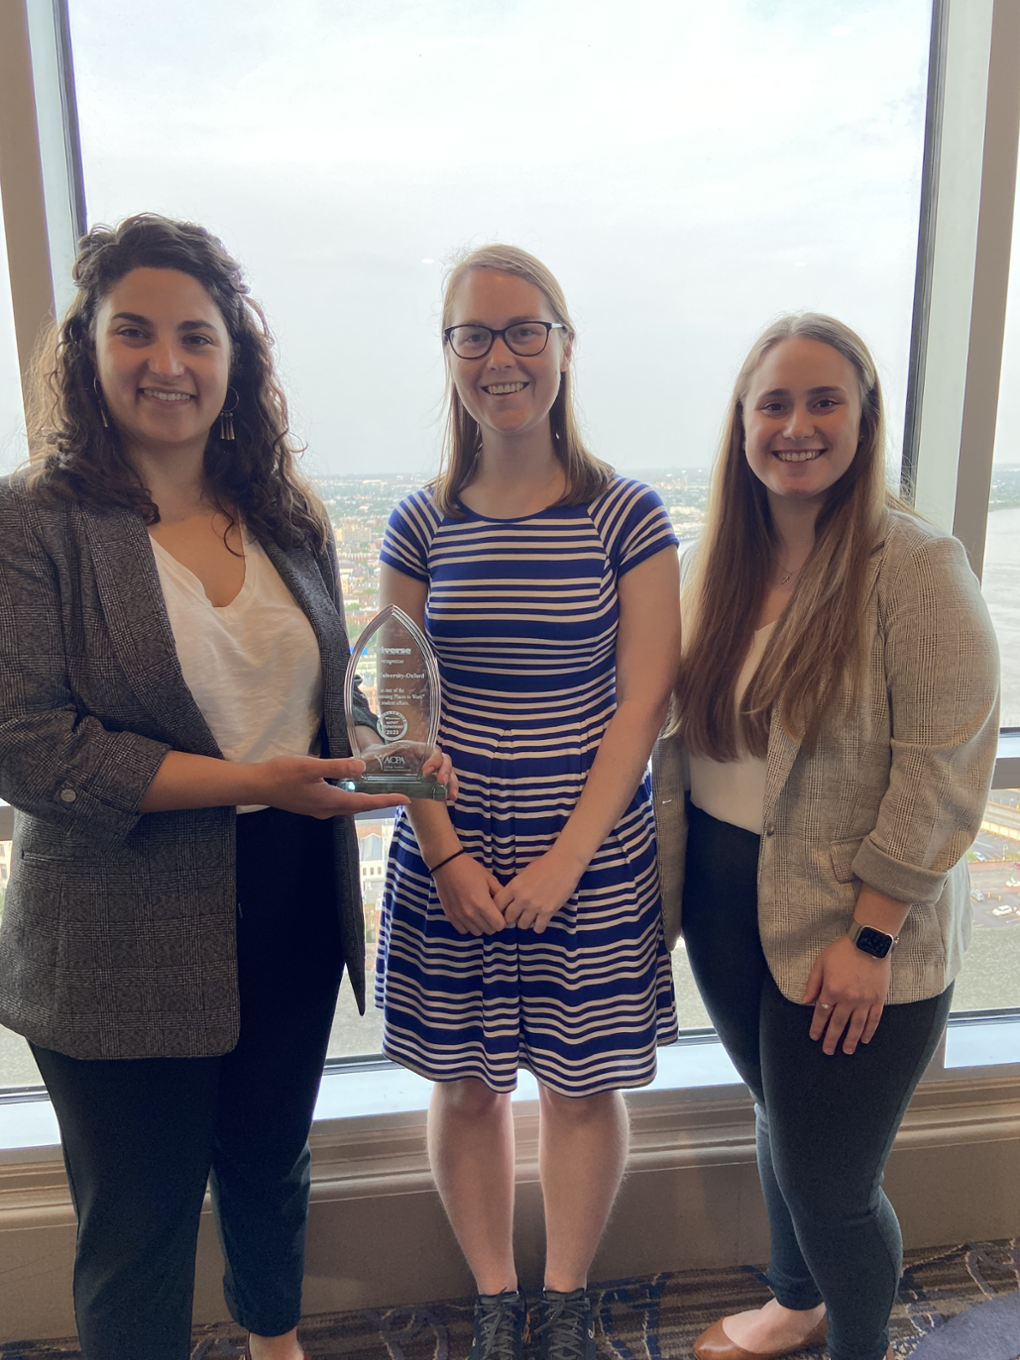 Kara Strass, Emily Cluen, and Kailey Costible at the ACPA event, holding the statue award.